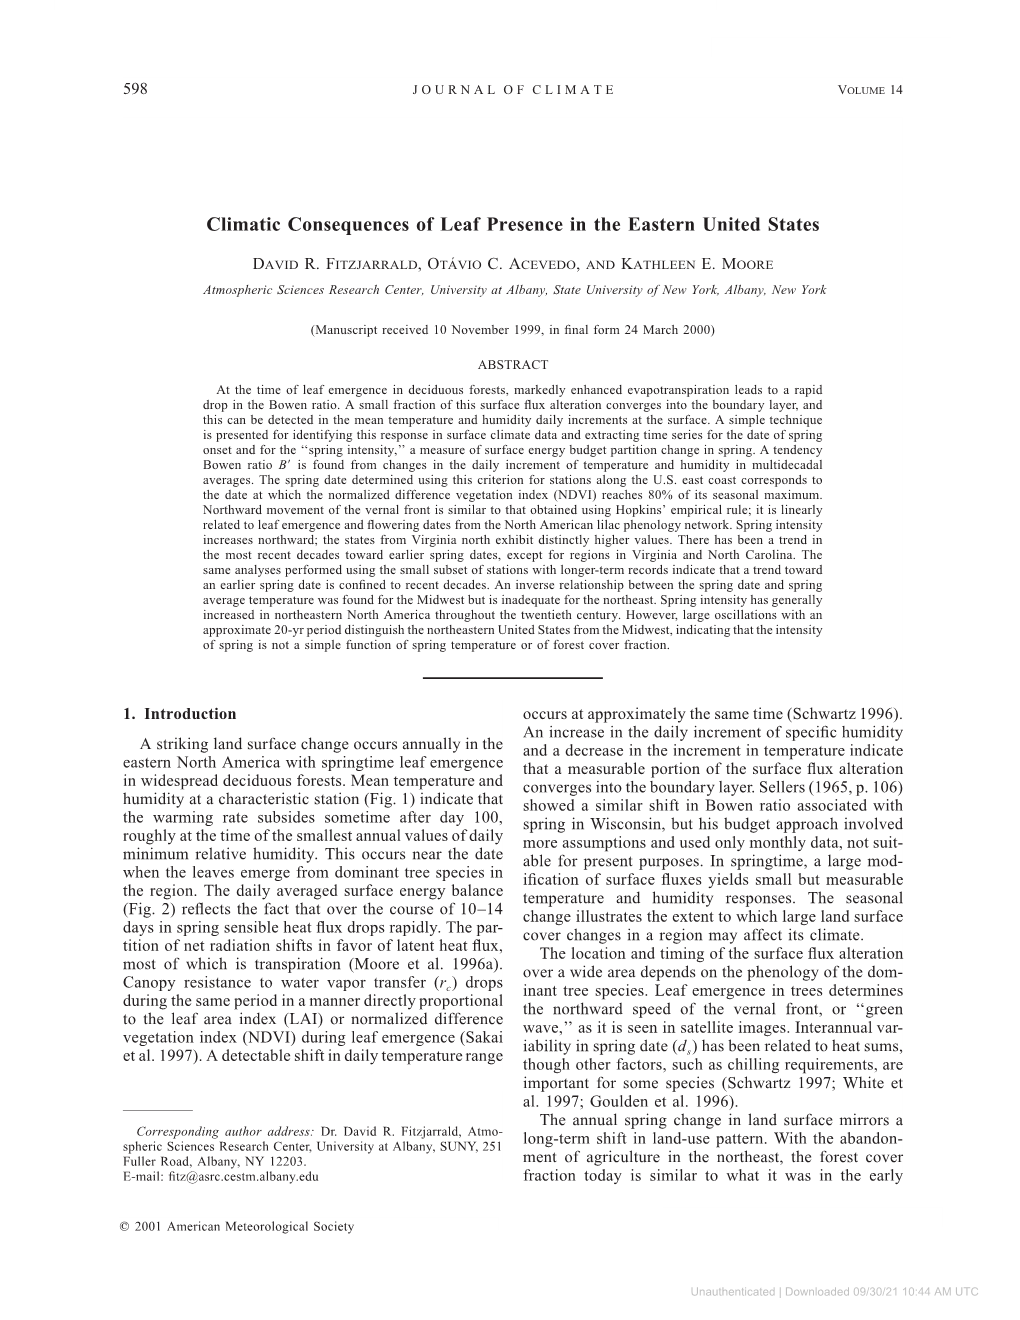 Climatic Consequences of Leaf Presence in the Eastern United States